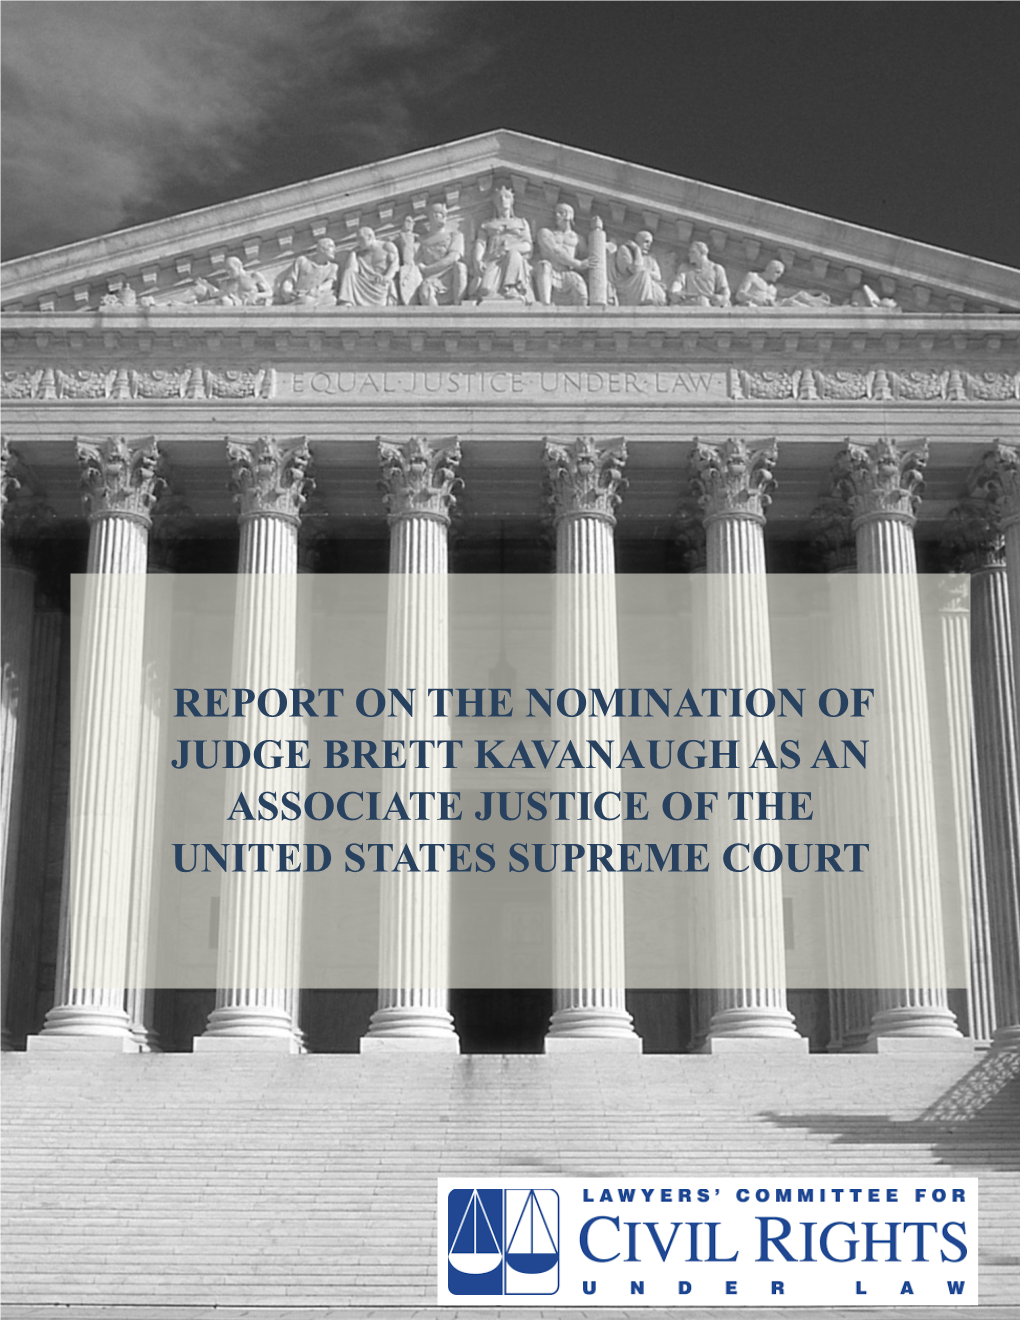 Report on the Nomination of Judge Brett Kavanaugh As an Associate Justice of the United States Supreme Court